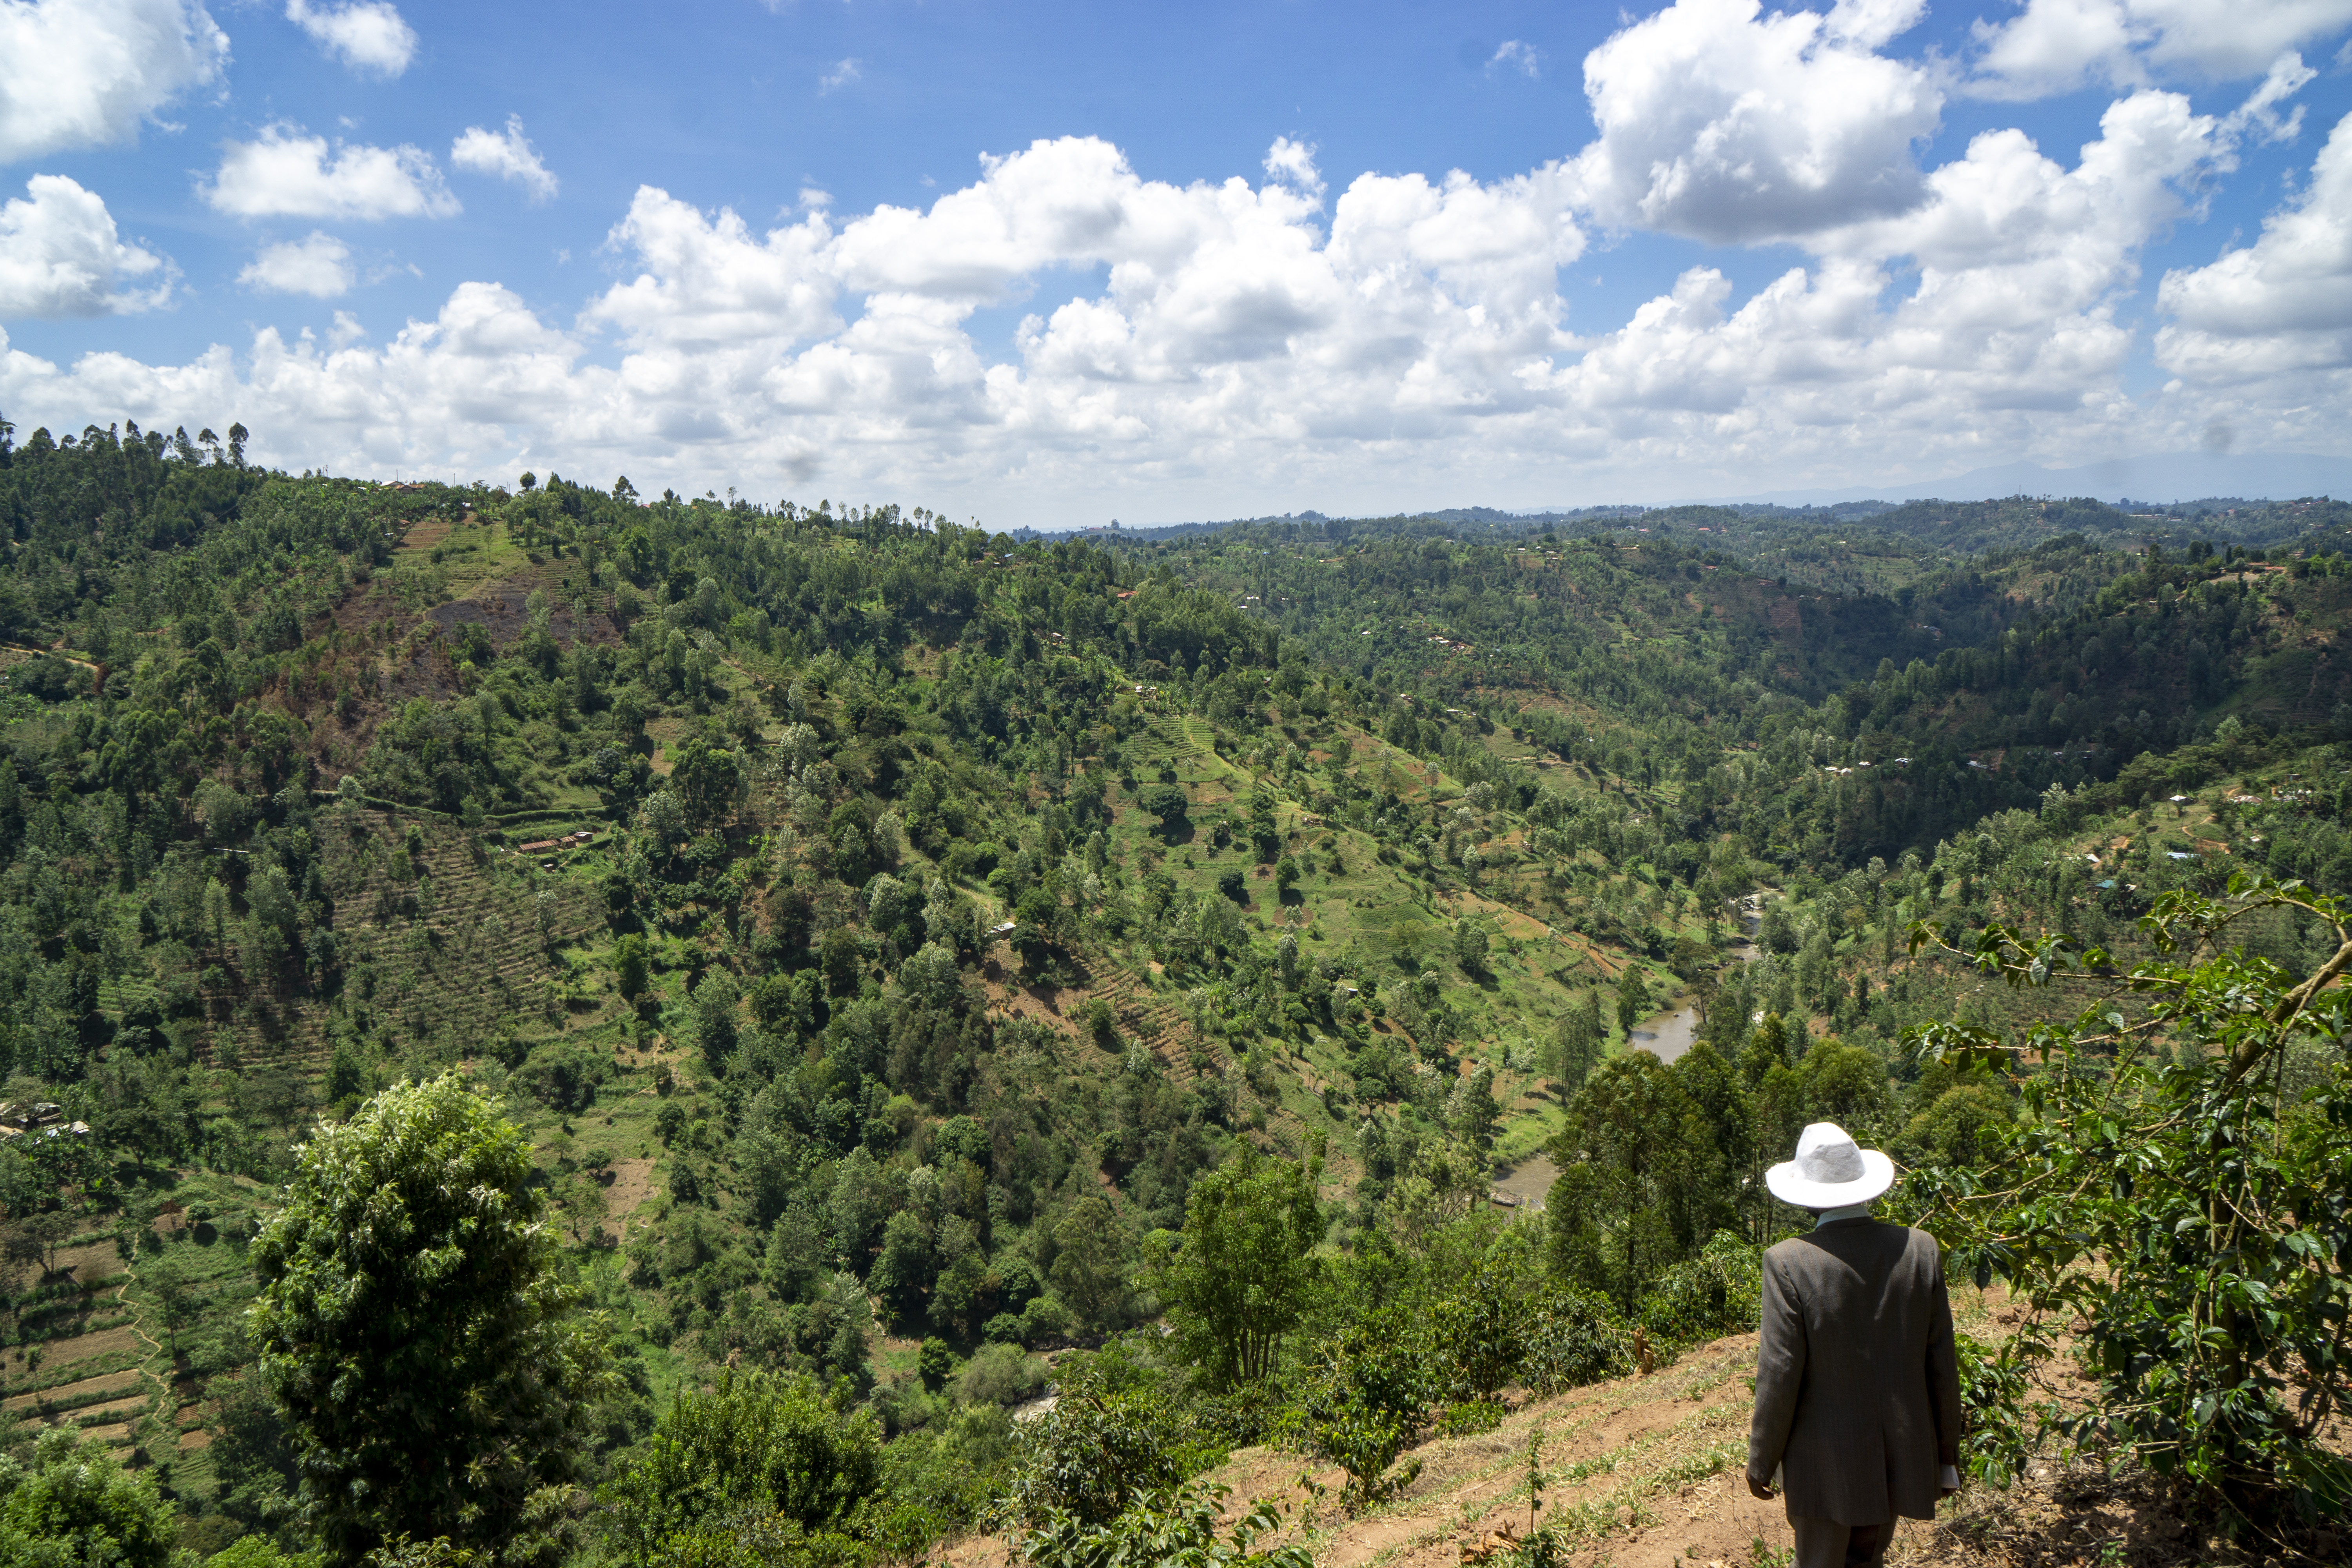 View of the landscape at Kieni